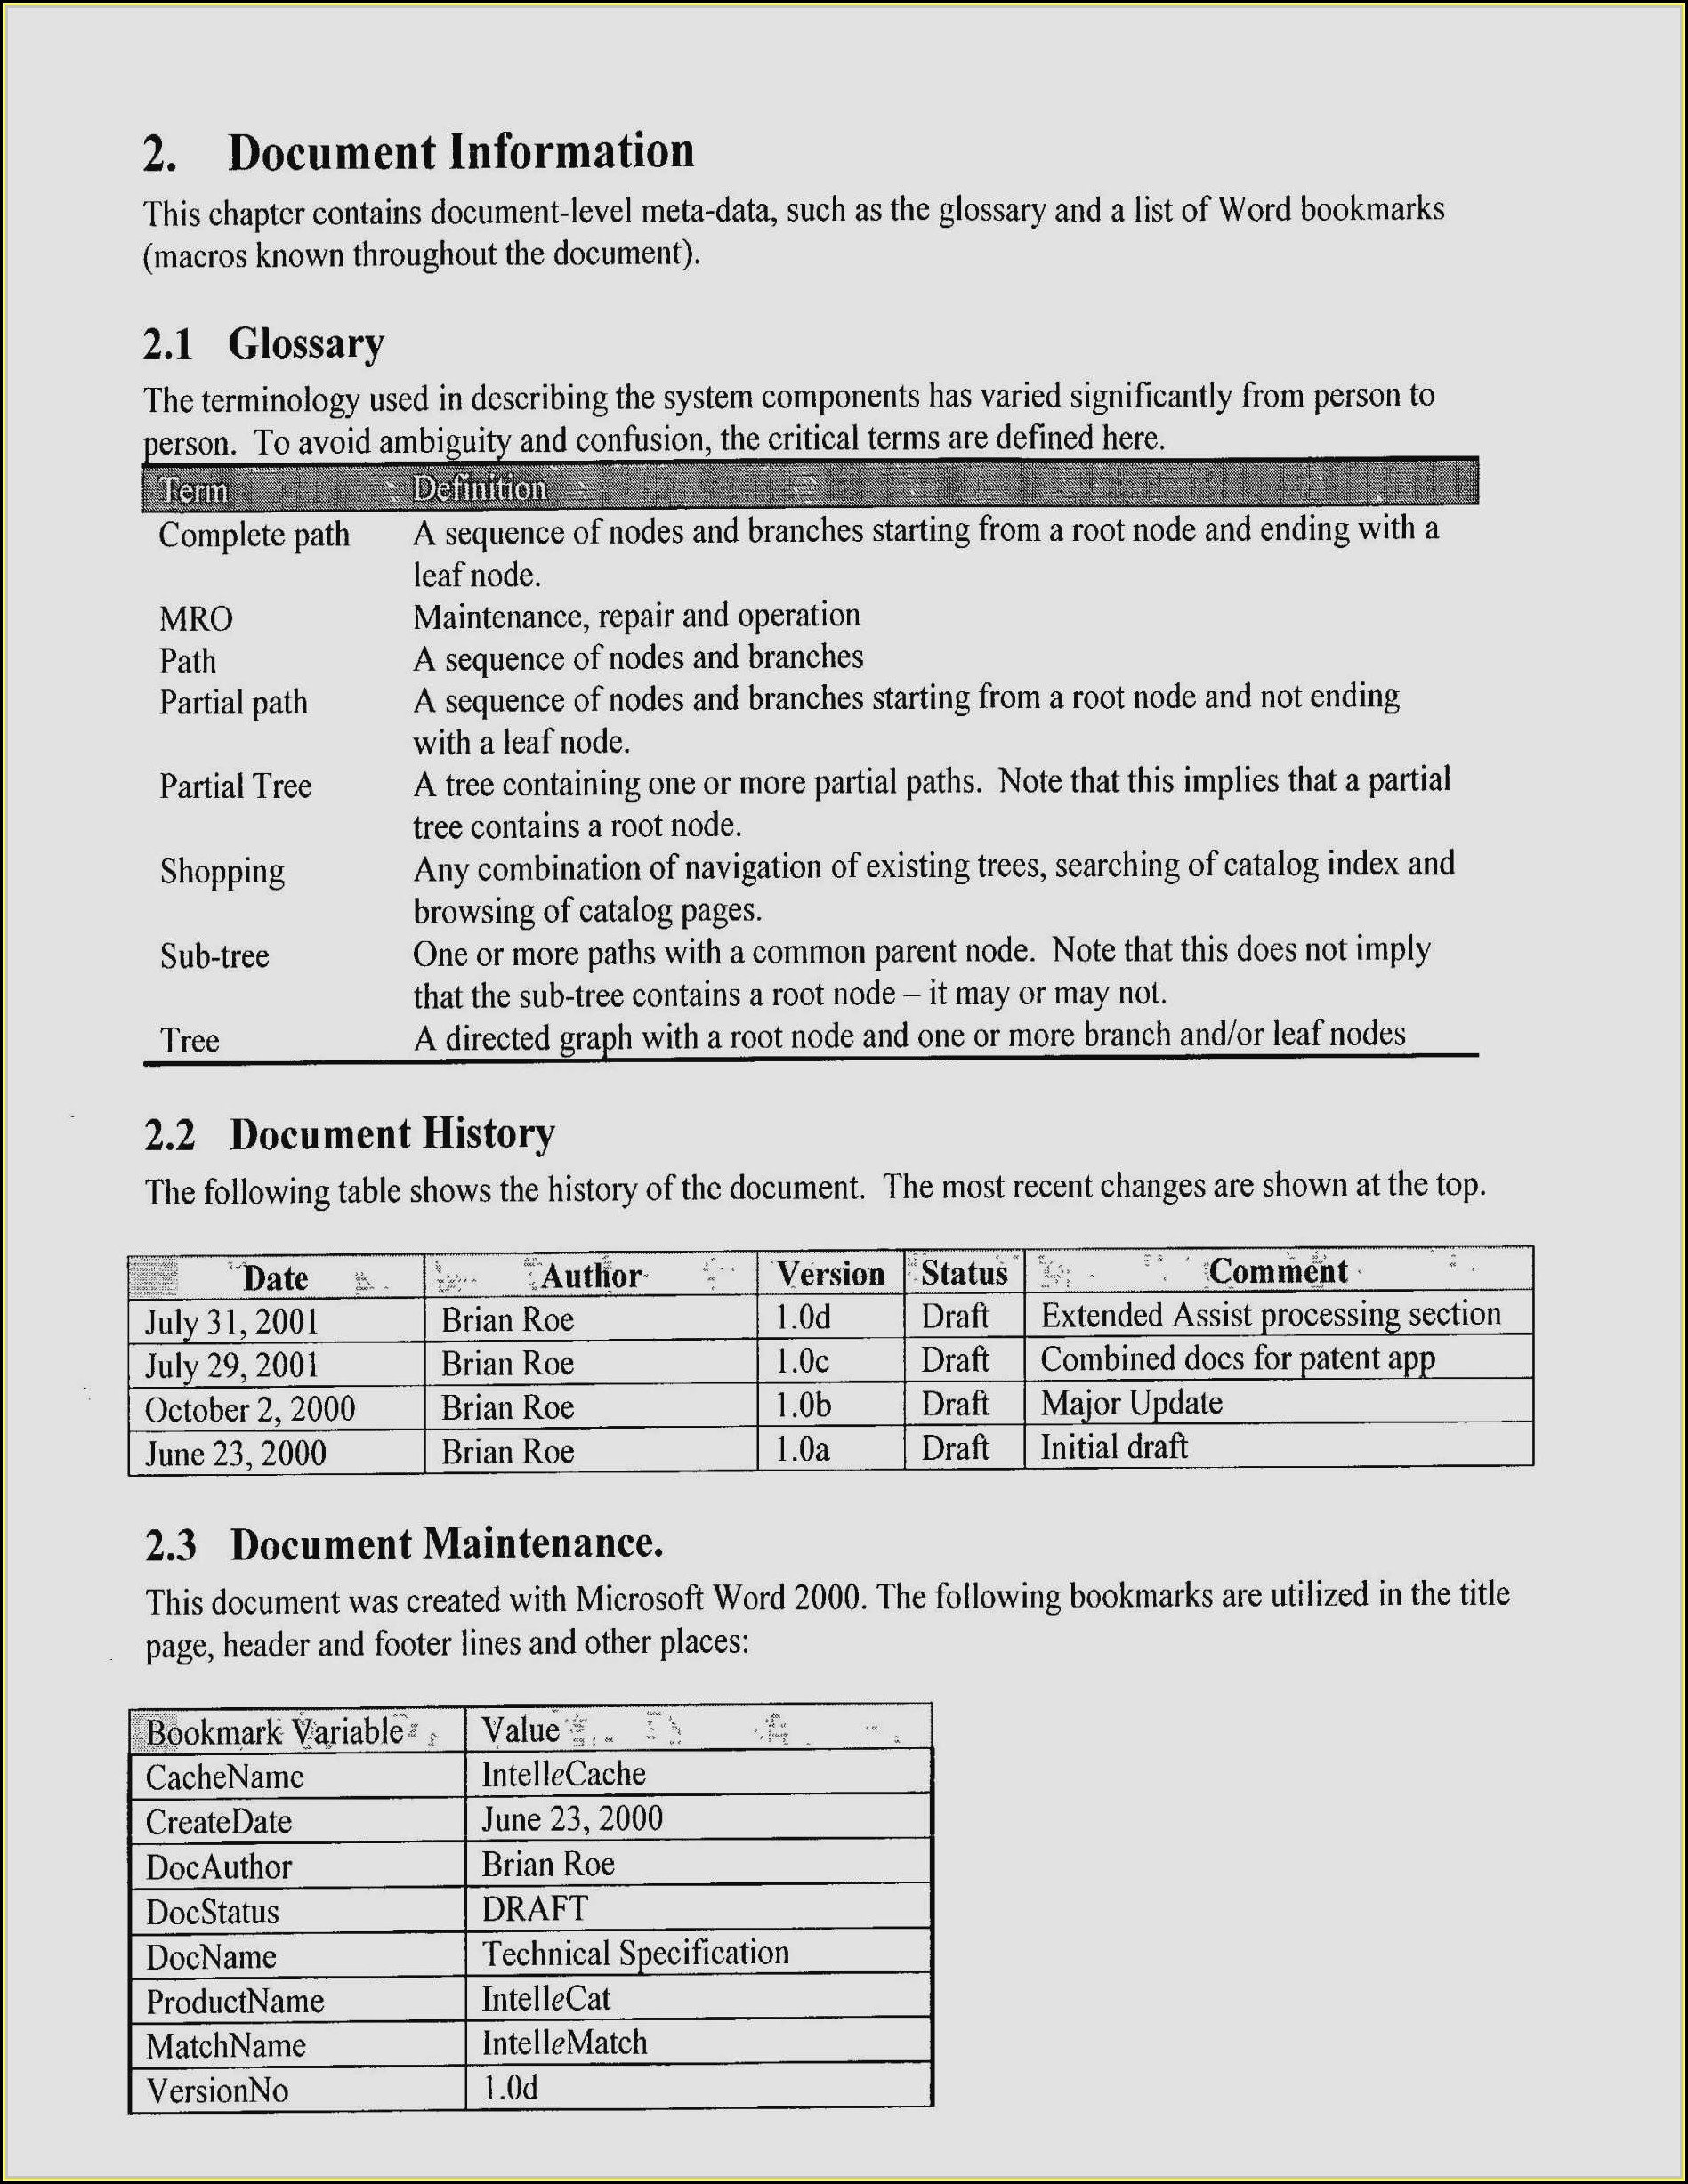 Construction Manager Resume Template Microsoft Word